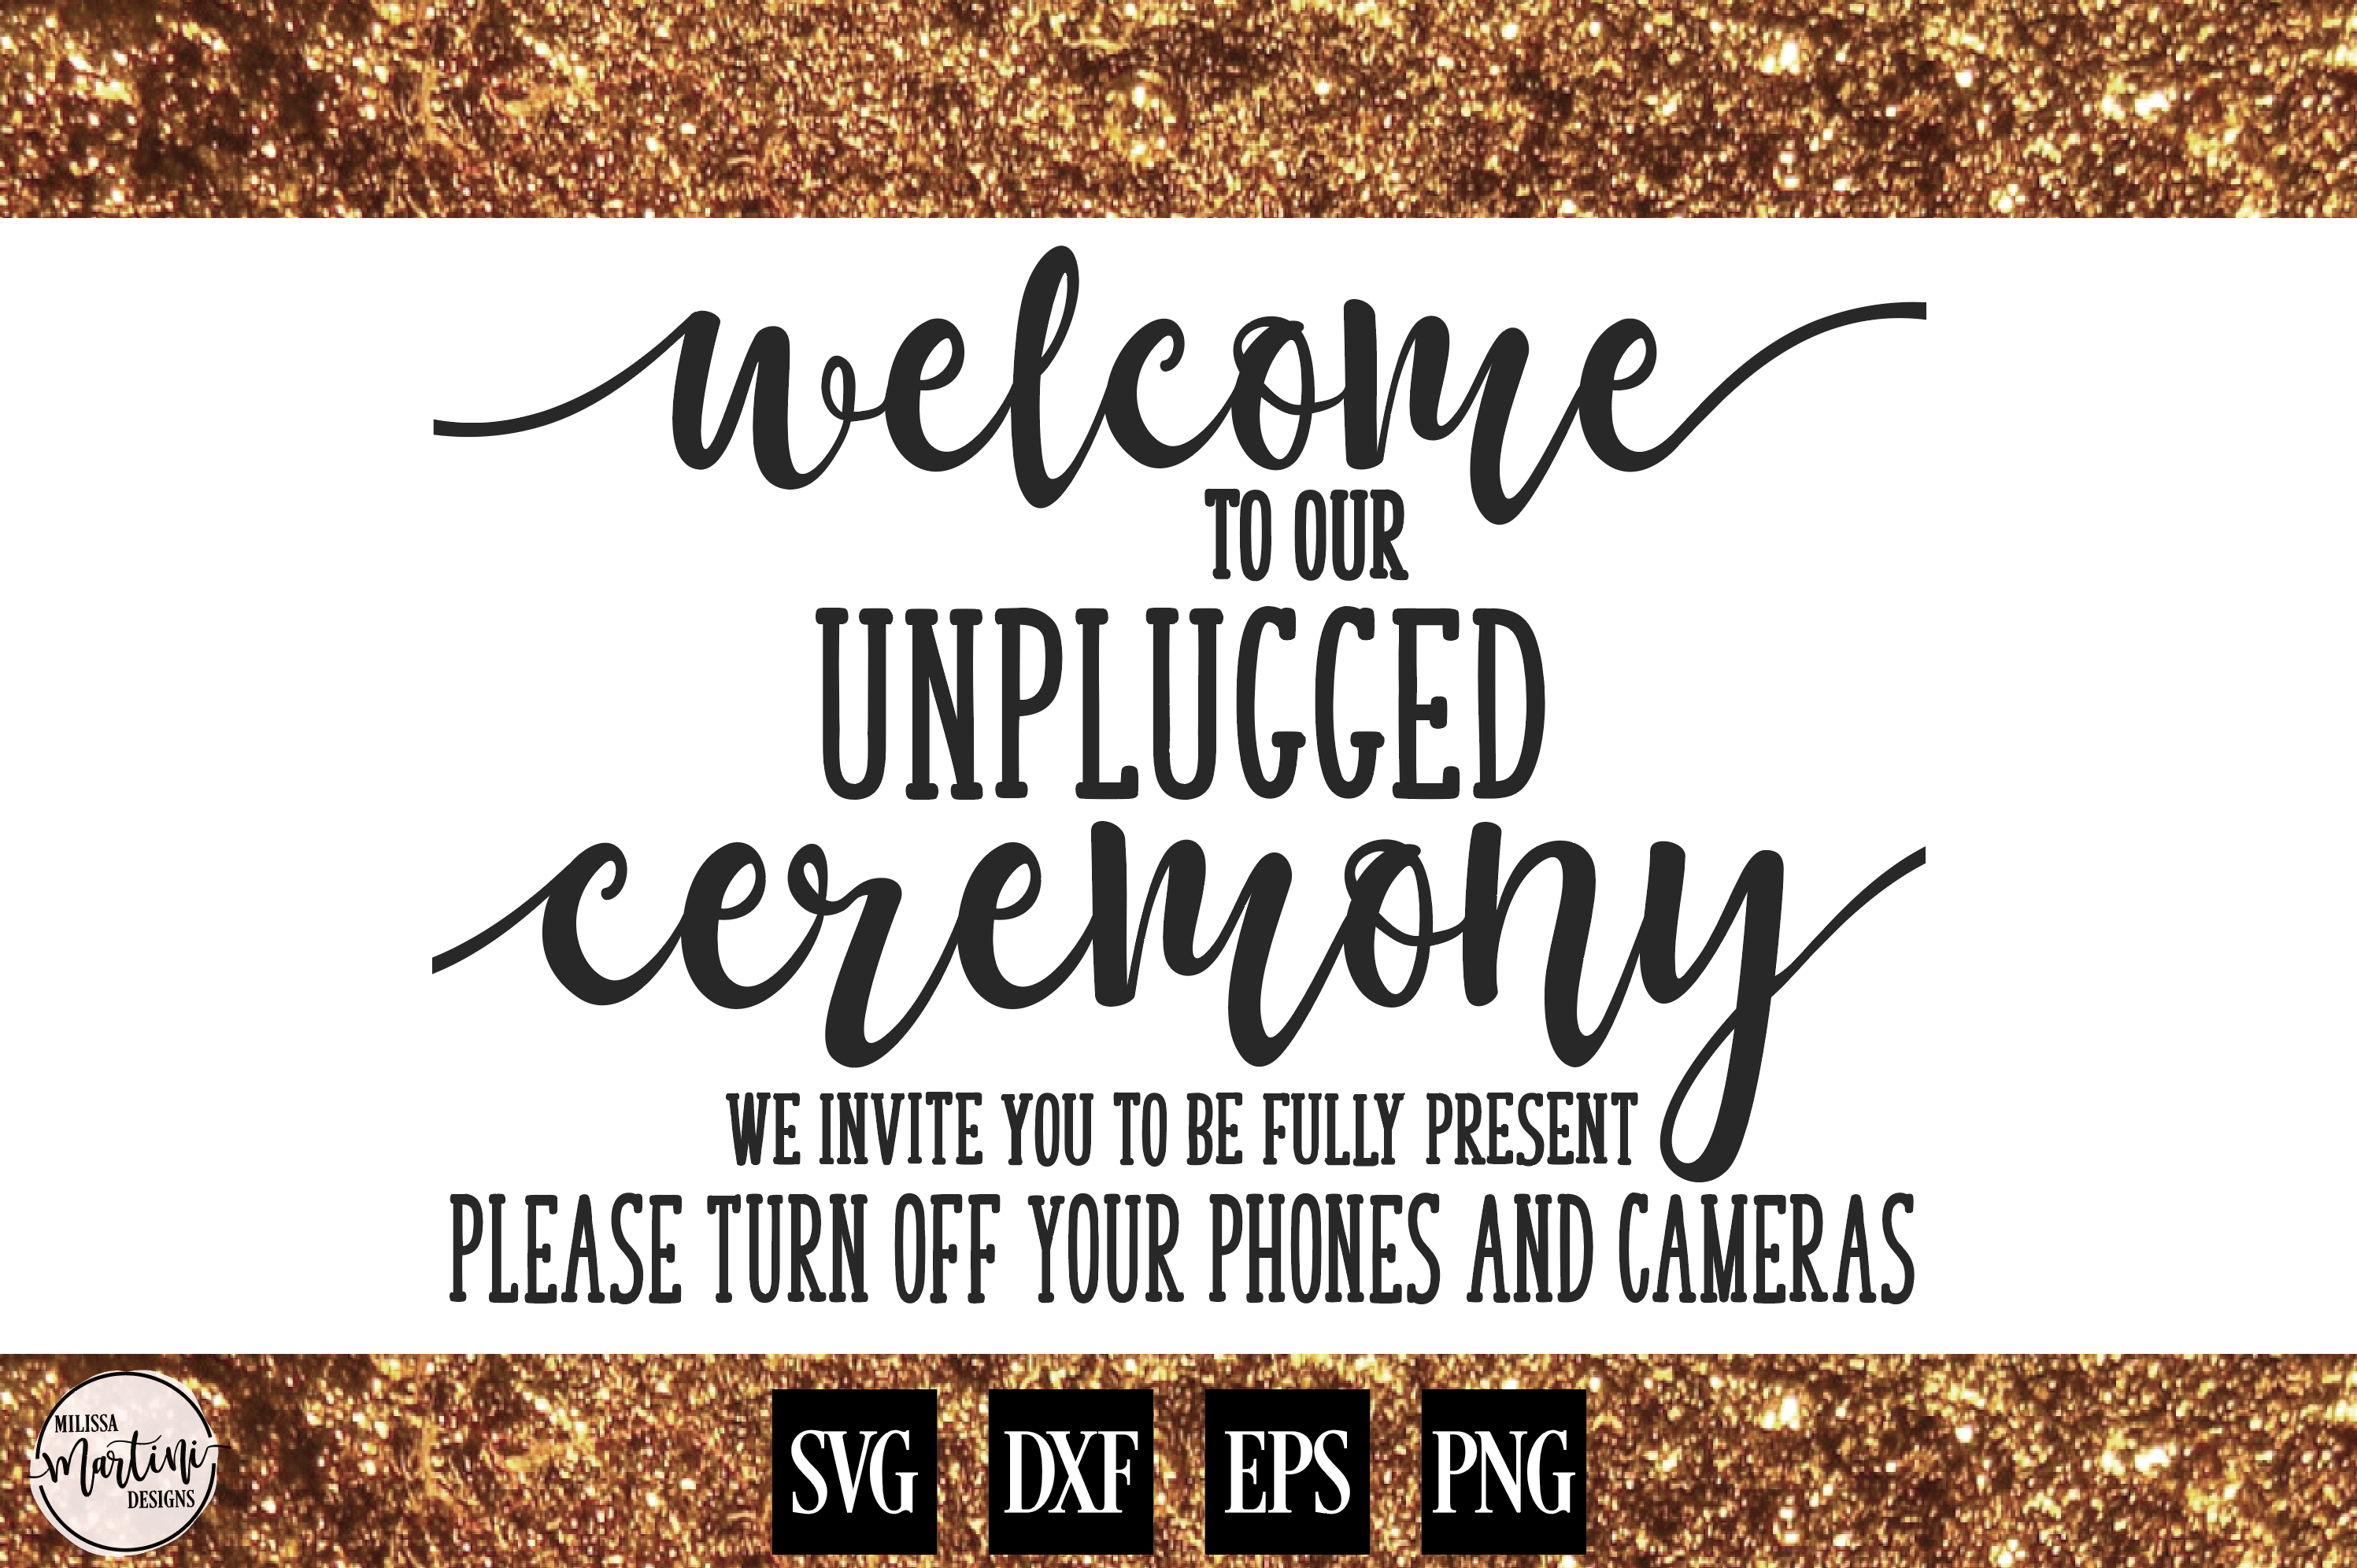 Welcome to Our Unplugged Ceremony Wedding Sign (18291 ...